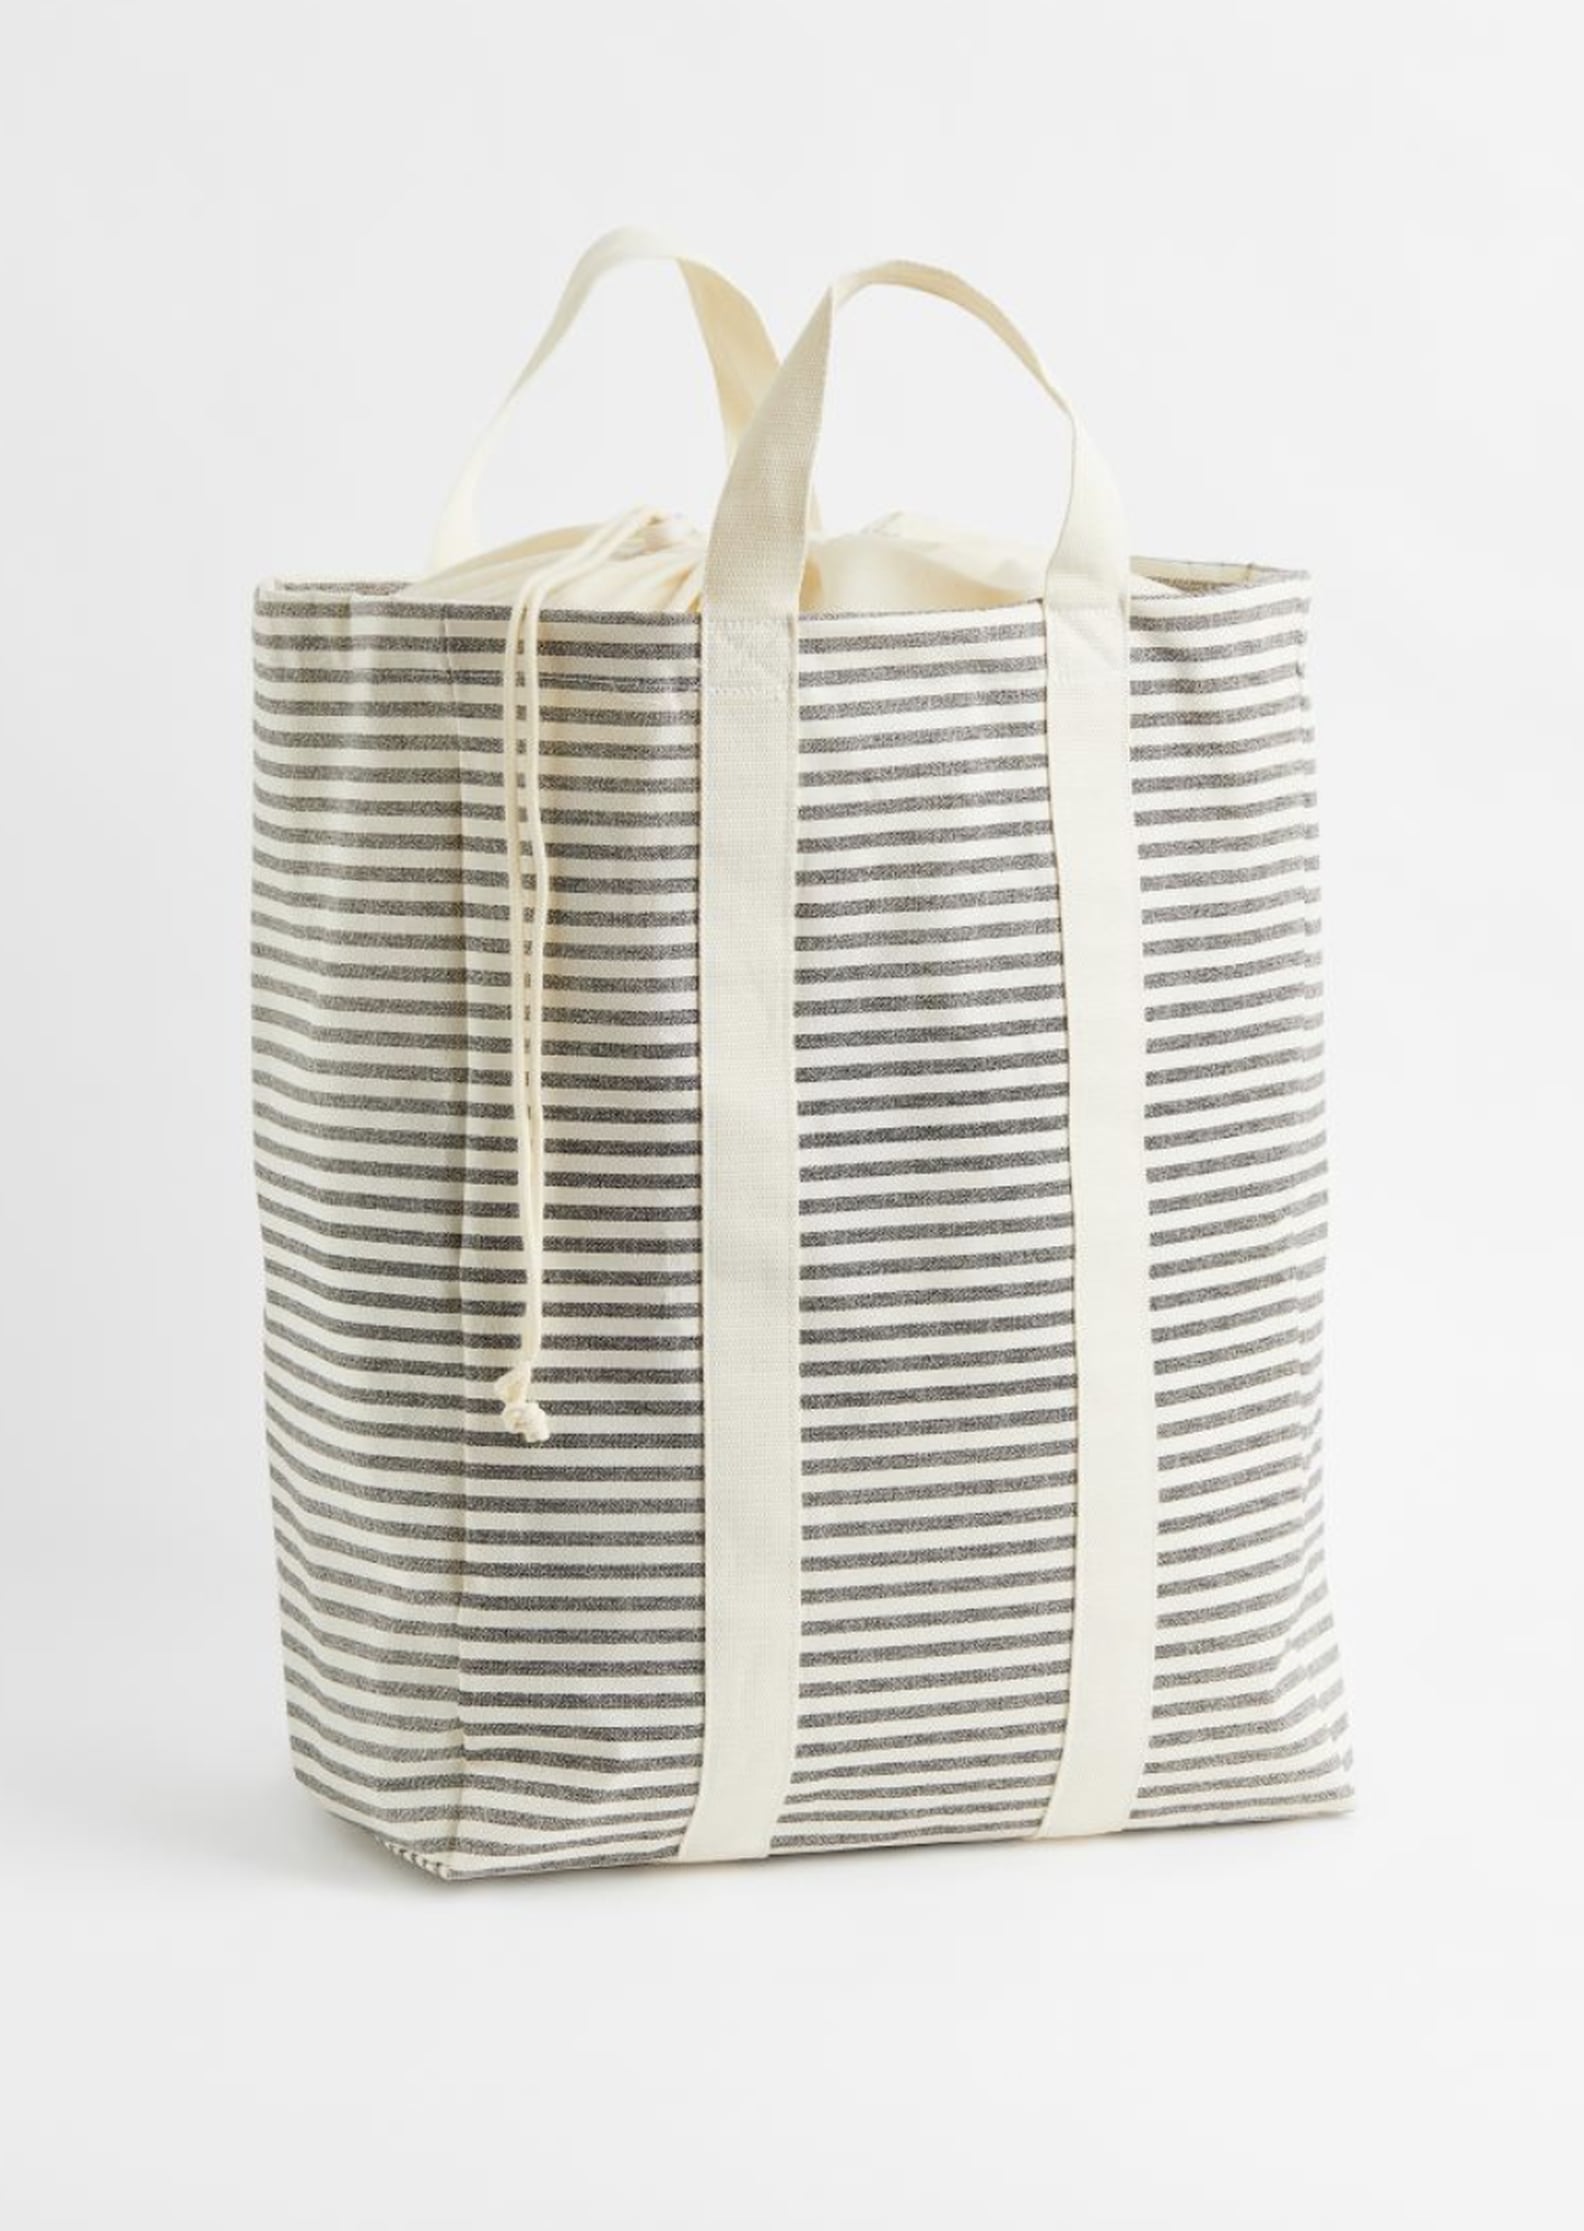 Best Stylish Laundry Baskets and Hampers 2023 | POPSUGAR Home